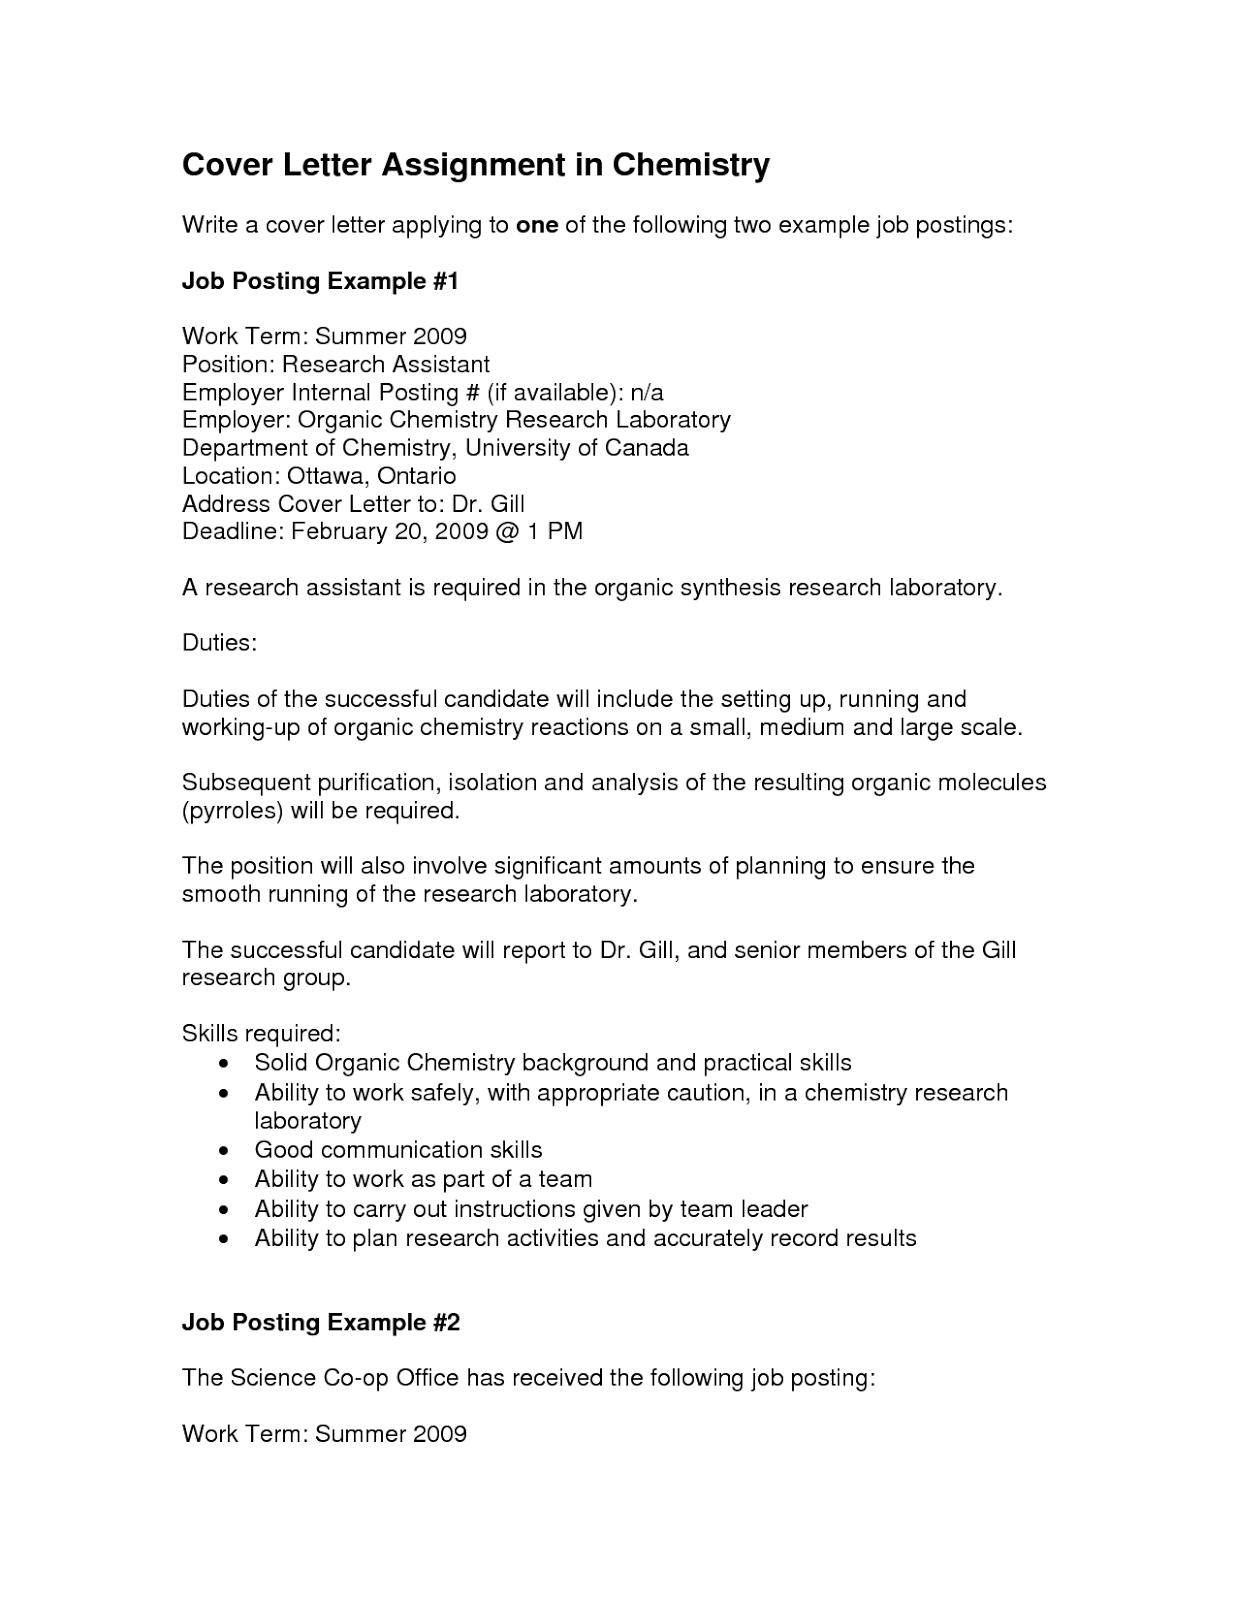 Cover letter for promotion to management position